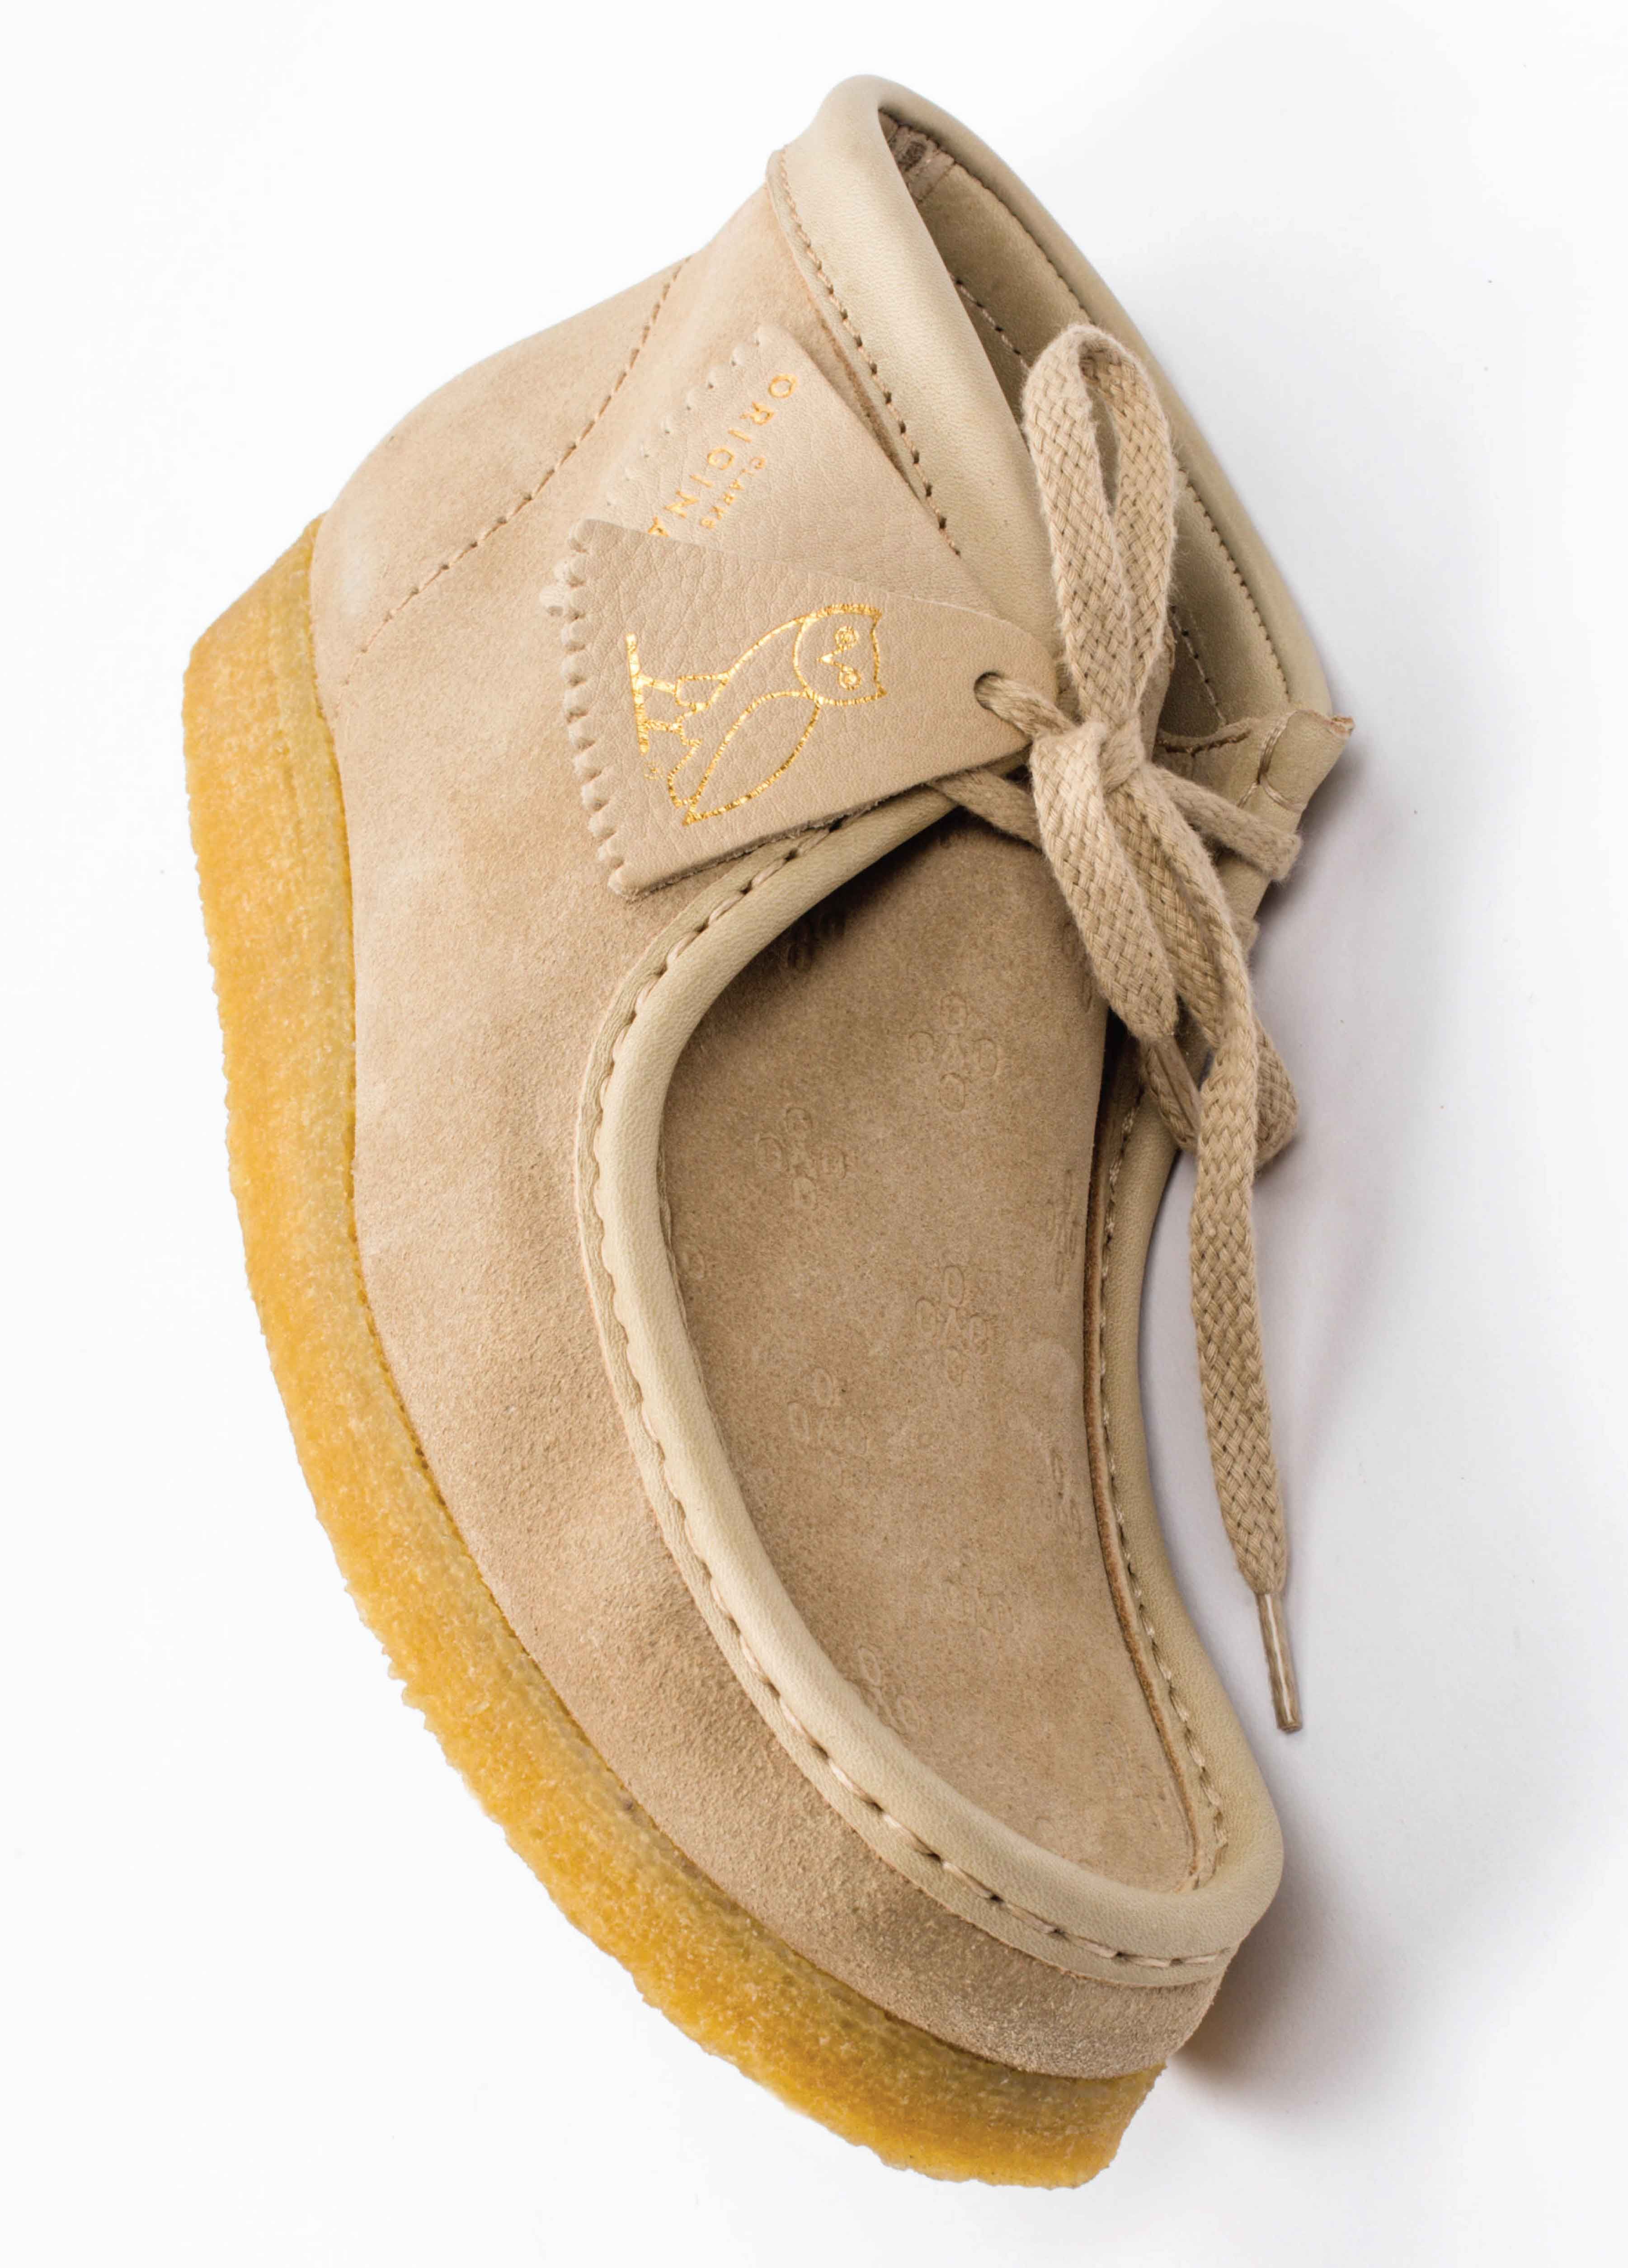 Drake's OVO Line Teams With Clarks for Wallabee Collection – Footwear News